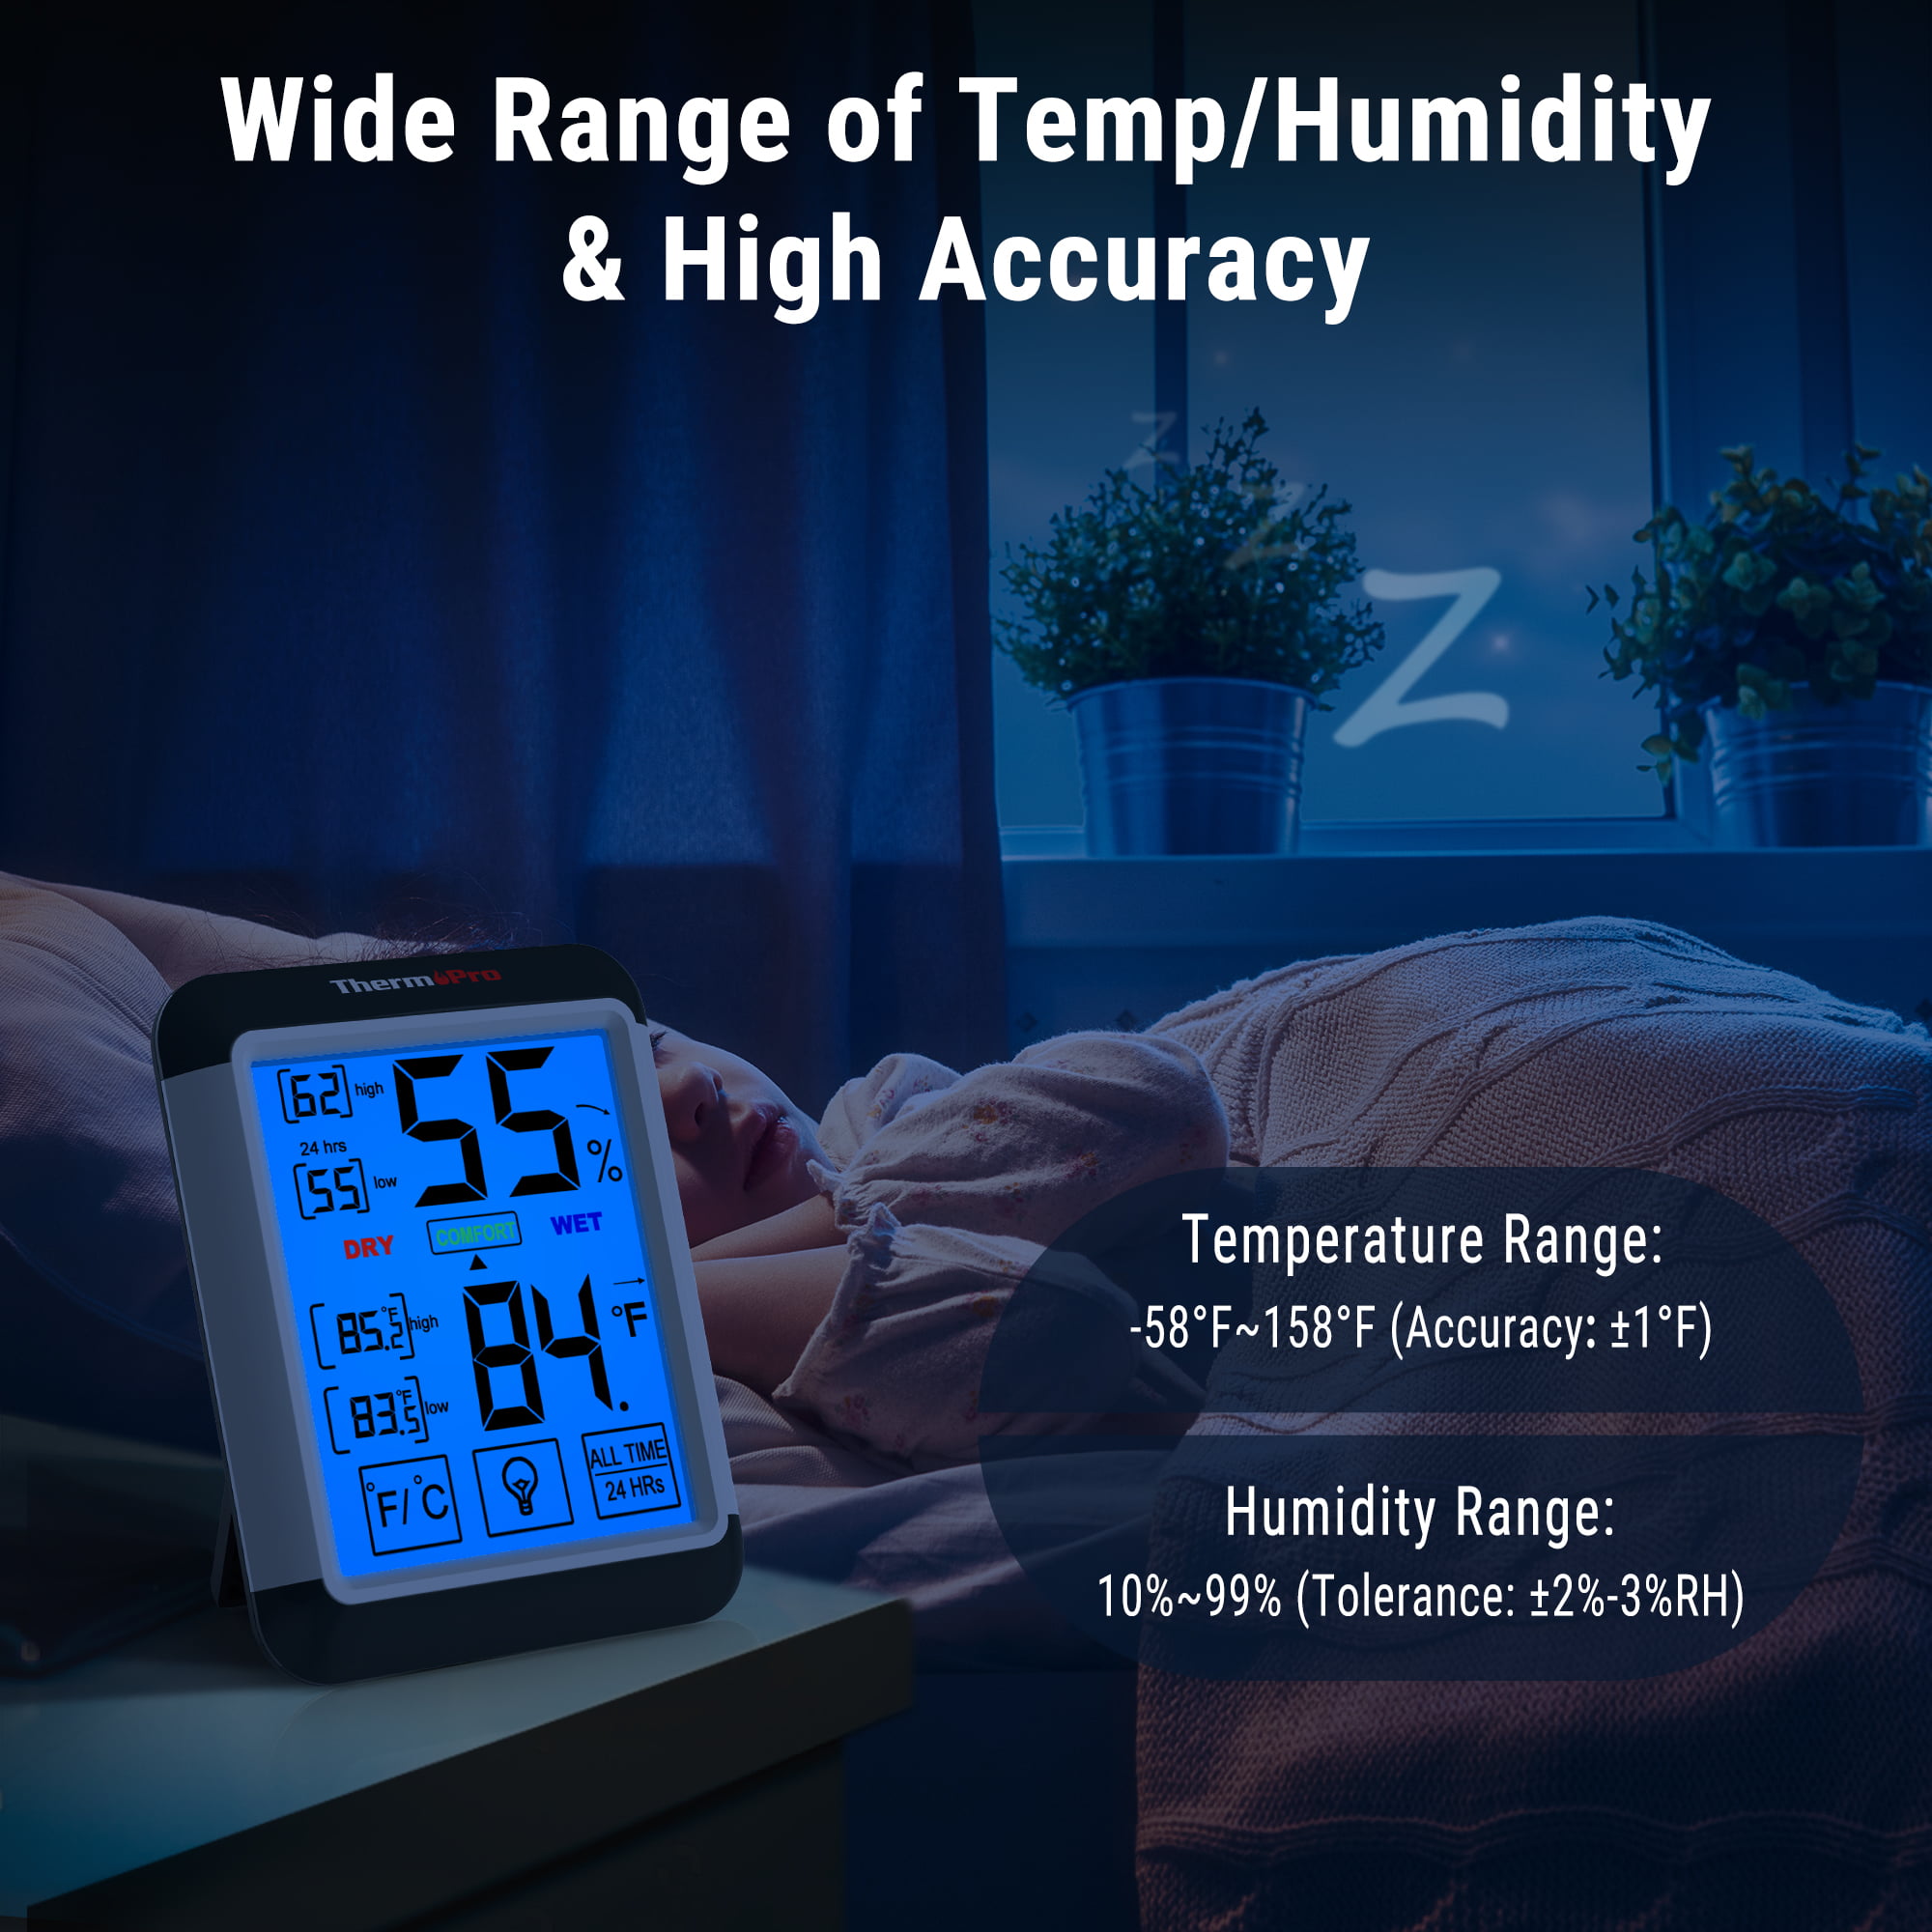 Thermopro TP55 Digital Hygrometer Thermometer Indoor Thermometer with  Touchscreen and Backlight Humidity Temperature Sensor